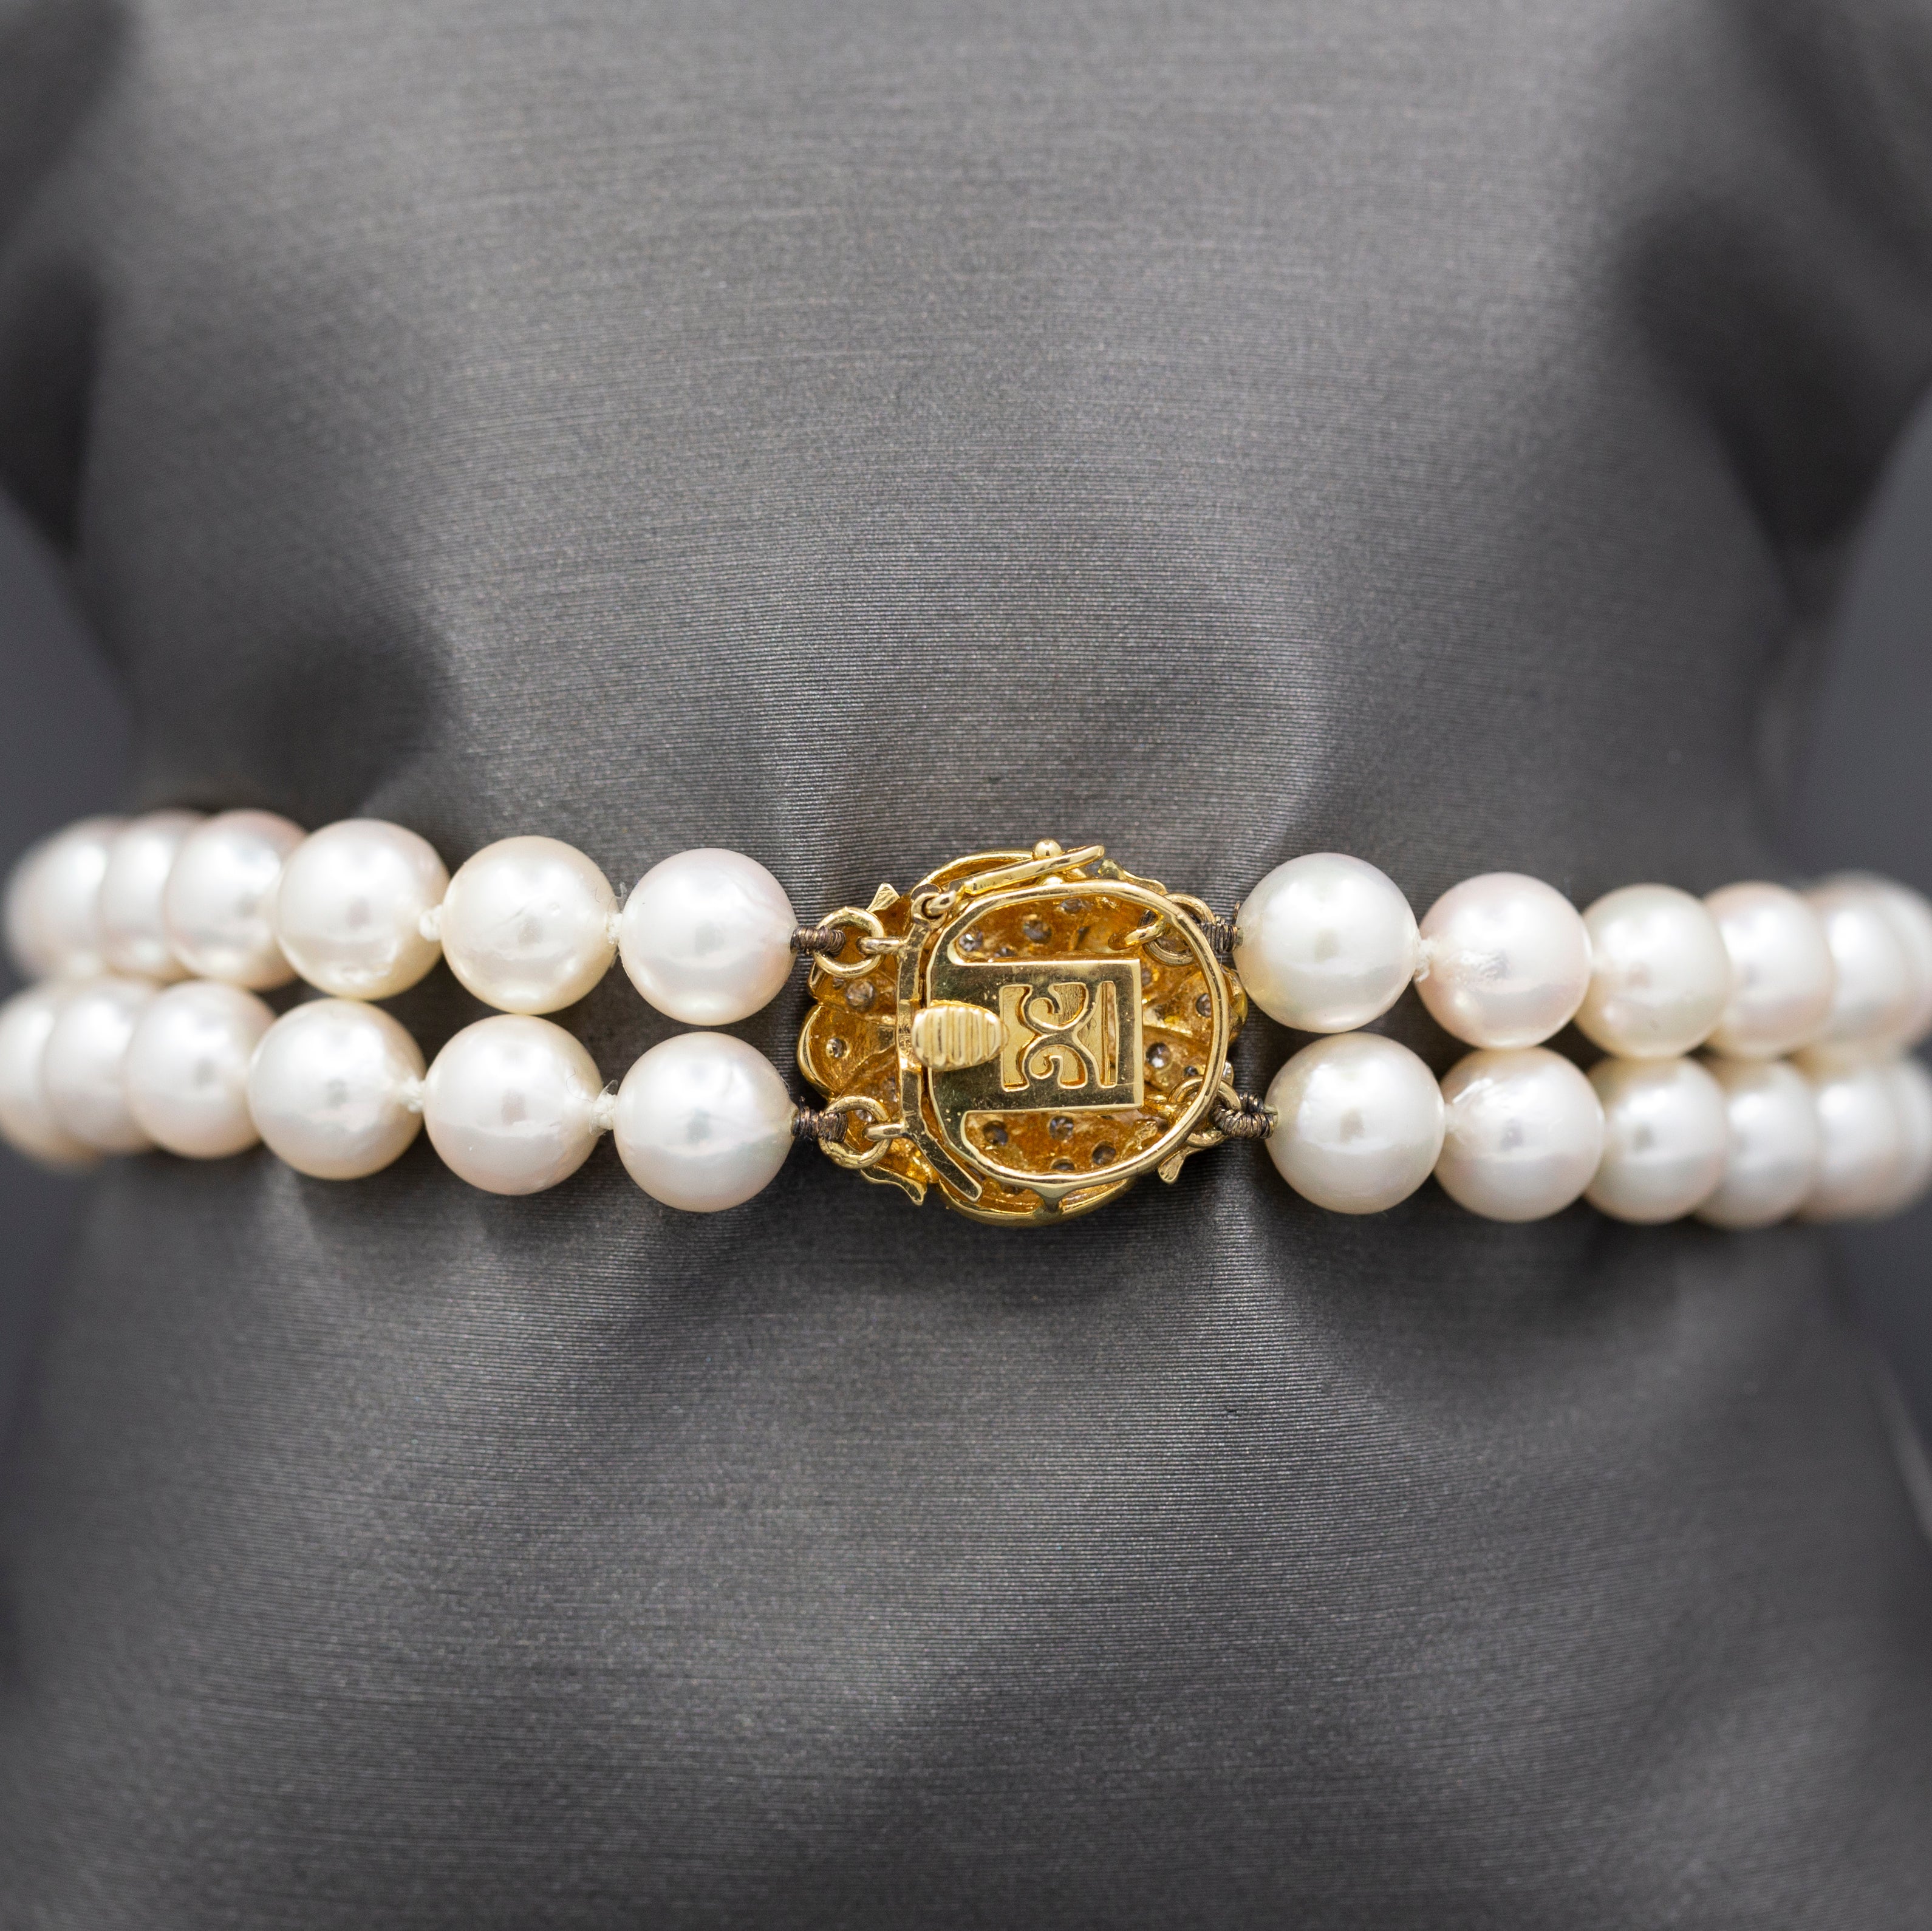 Luxurious Two Strand Cultured Pearl Bracelet with Diamond Clasp in 18k Yellow Gold